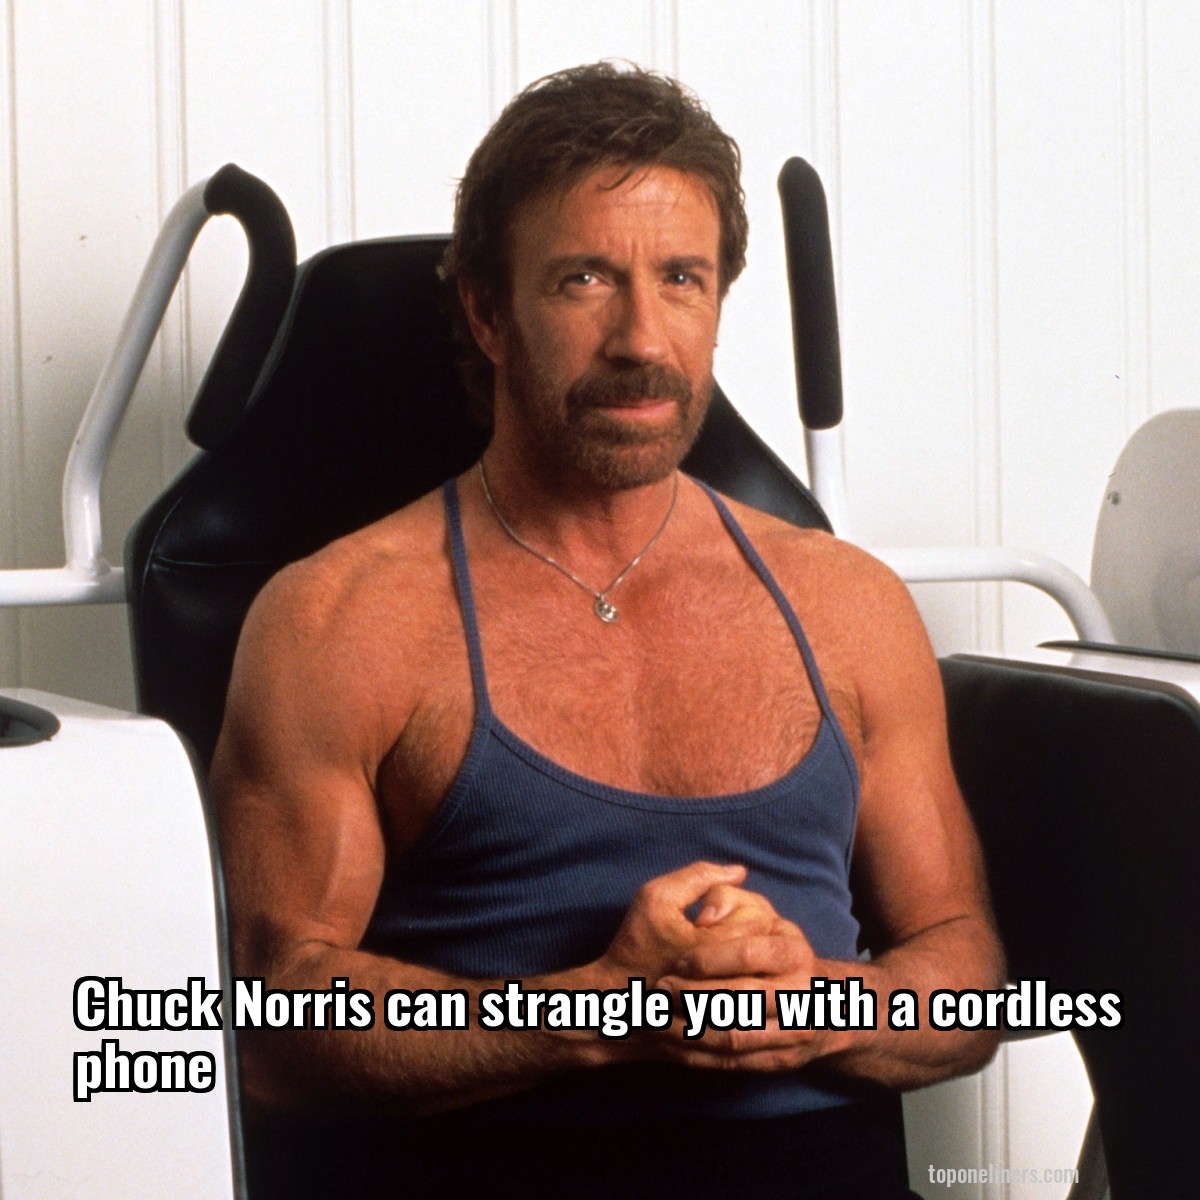 Chuck Norris can strangle you with a cordless phone